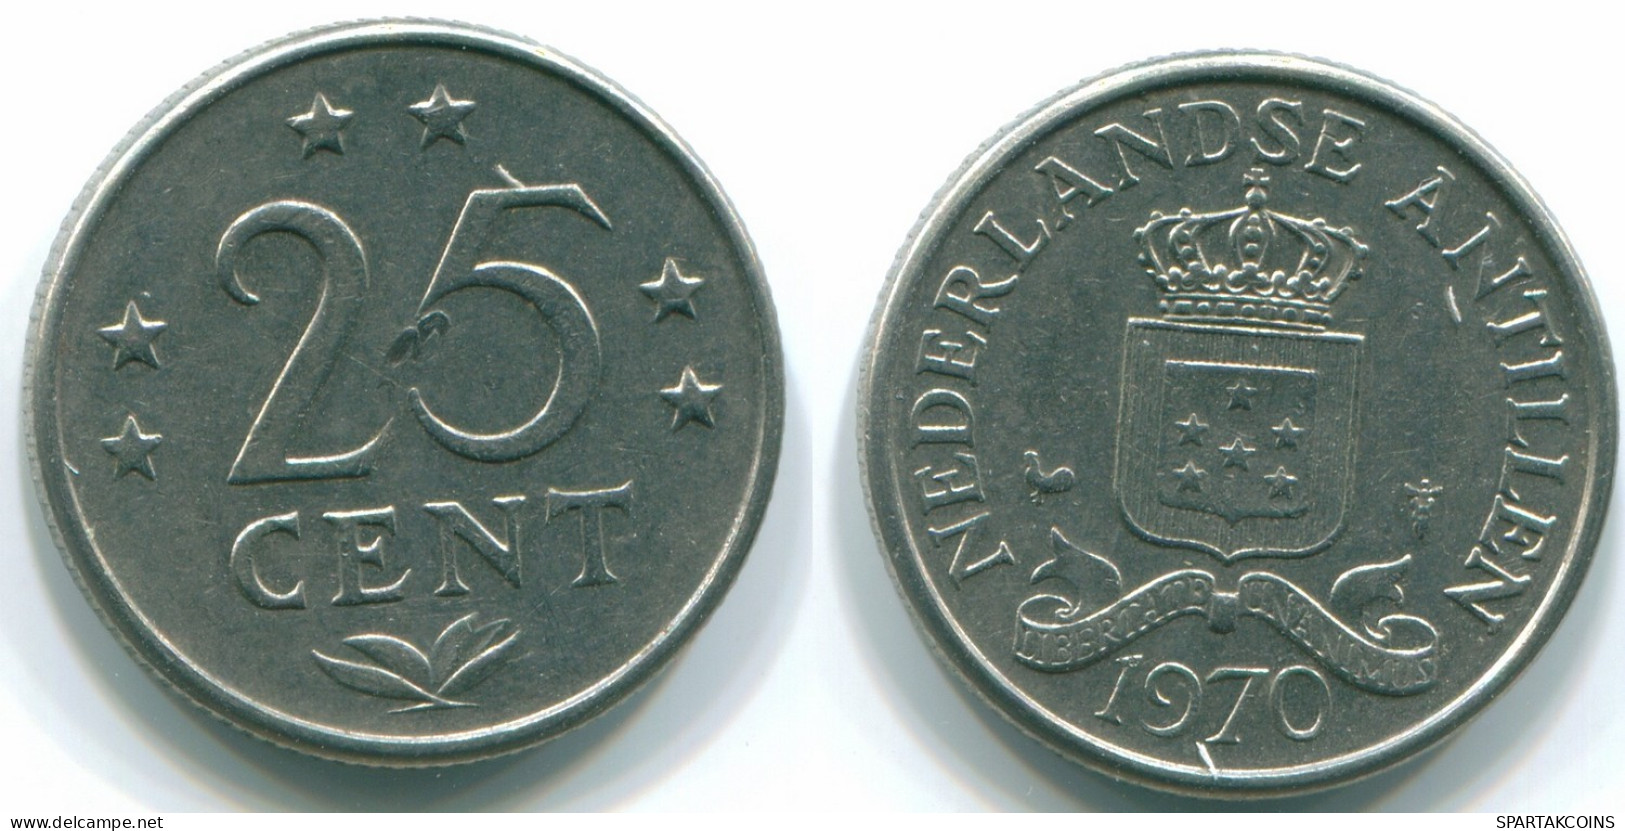 25 CENTS 1970 NETHERLANDS ANTILLES Nickel Colonial Coin #S11456.U.A - Netherlands Antilles